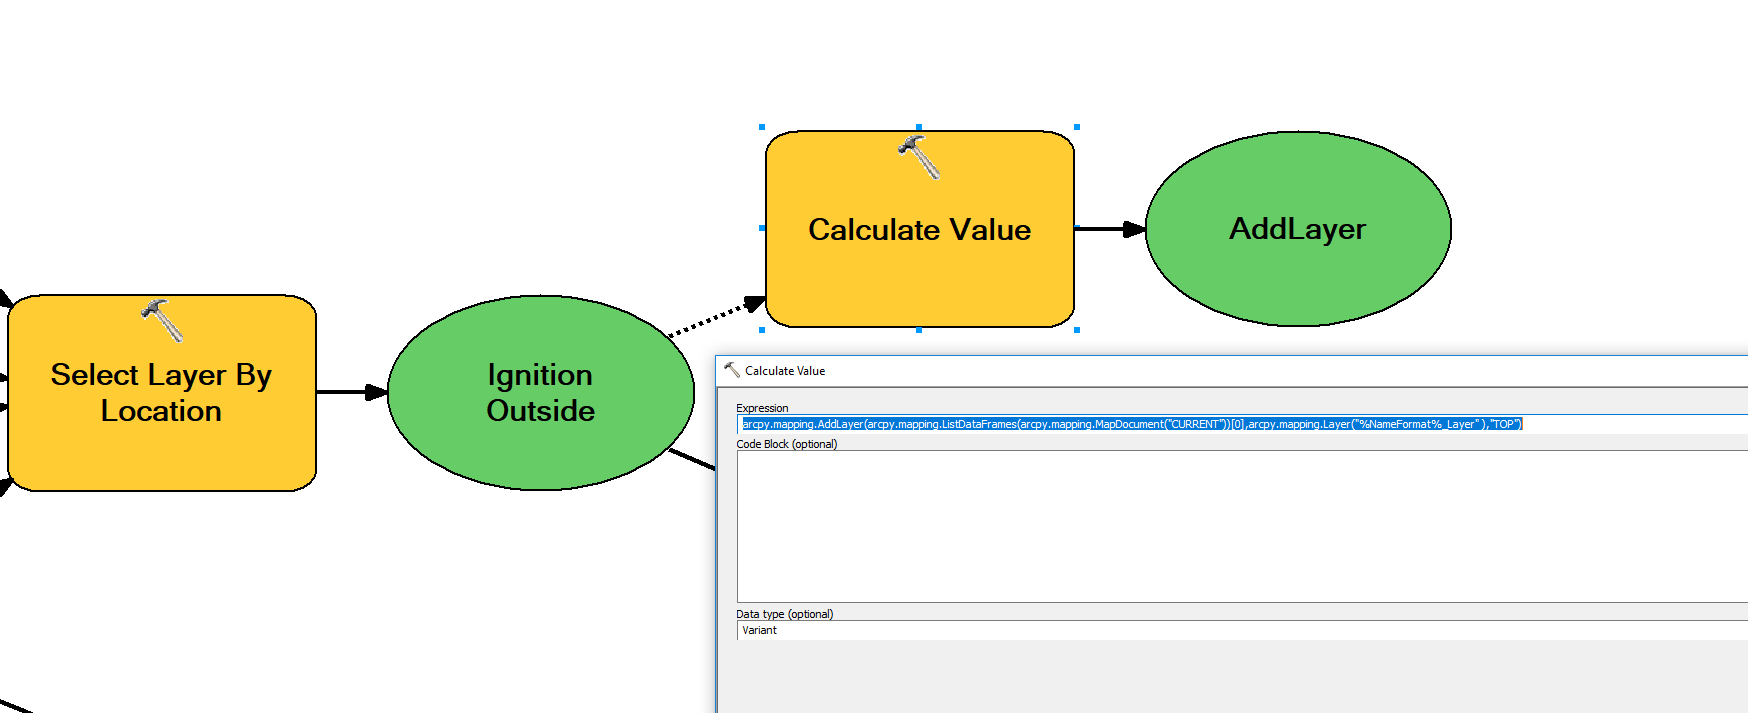 Add Feature Layer to TOC using Calculate Value